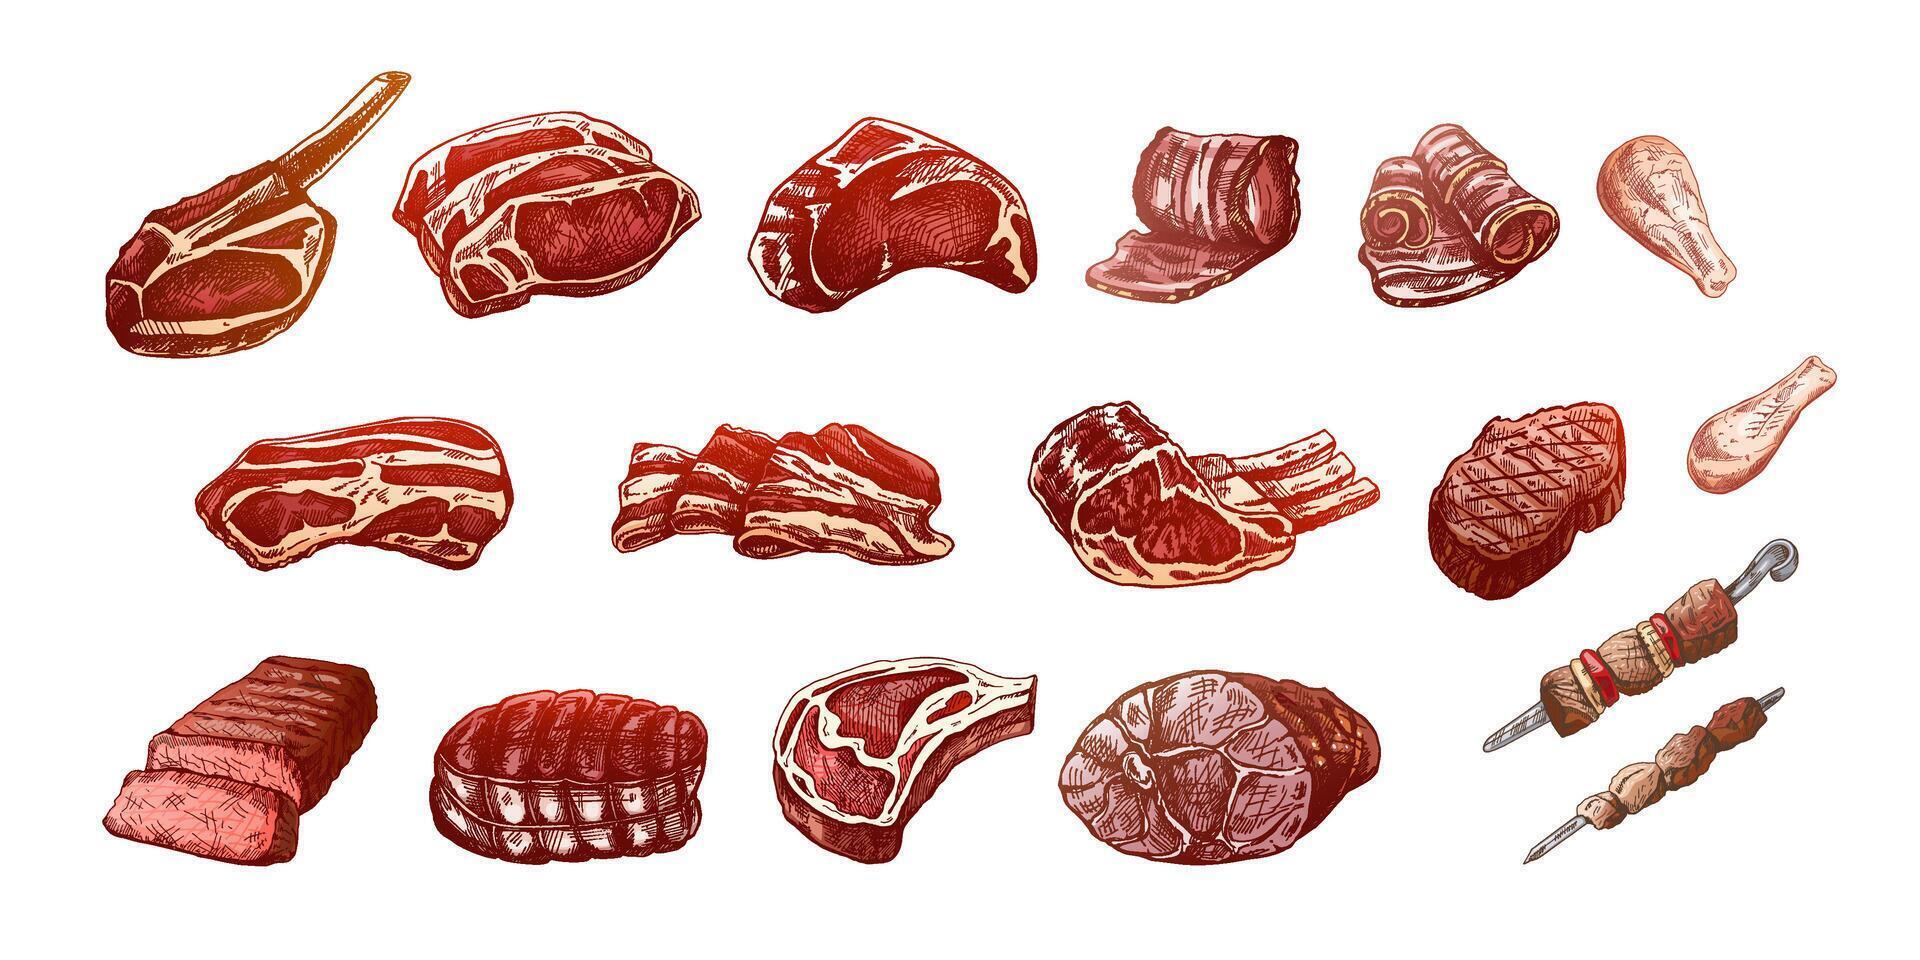 Set of hand-drawn colored sketches of different types of meat, steaks, chicken, kebabs, bacon, tenderloin, pork, beef, ham, barbecue. Vintage illustration on white background. vector